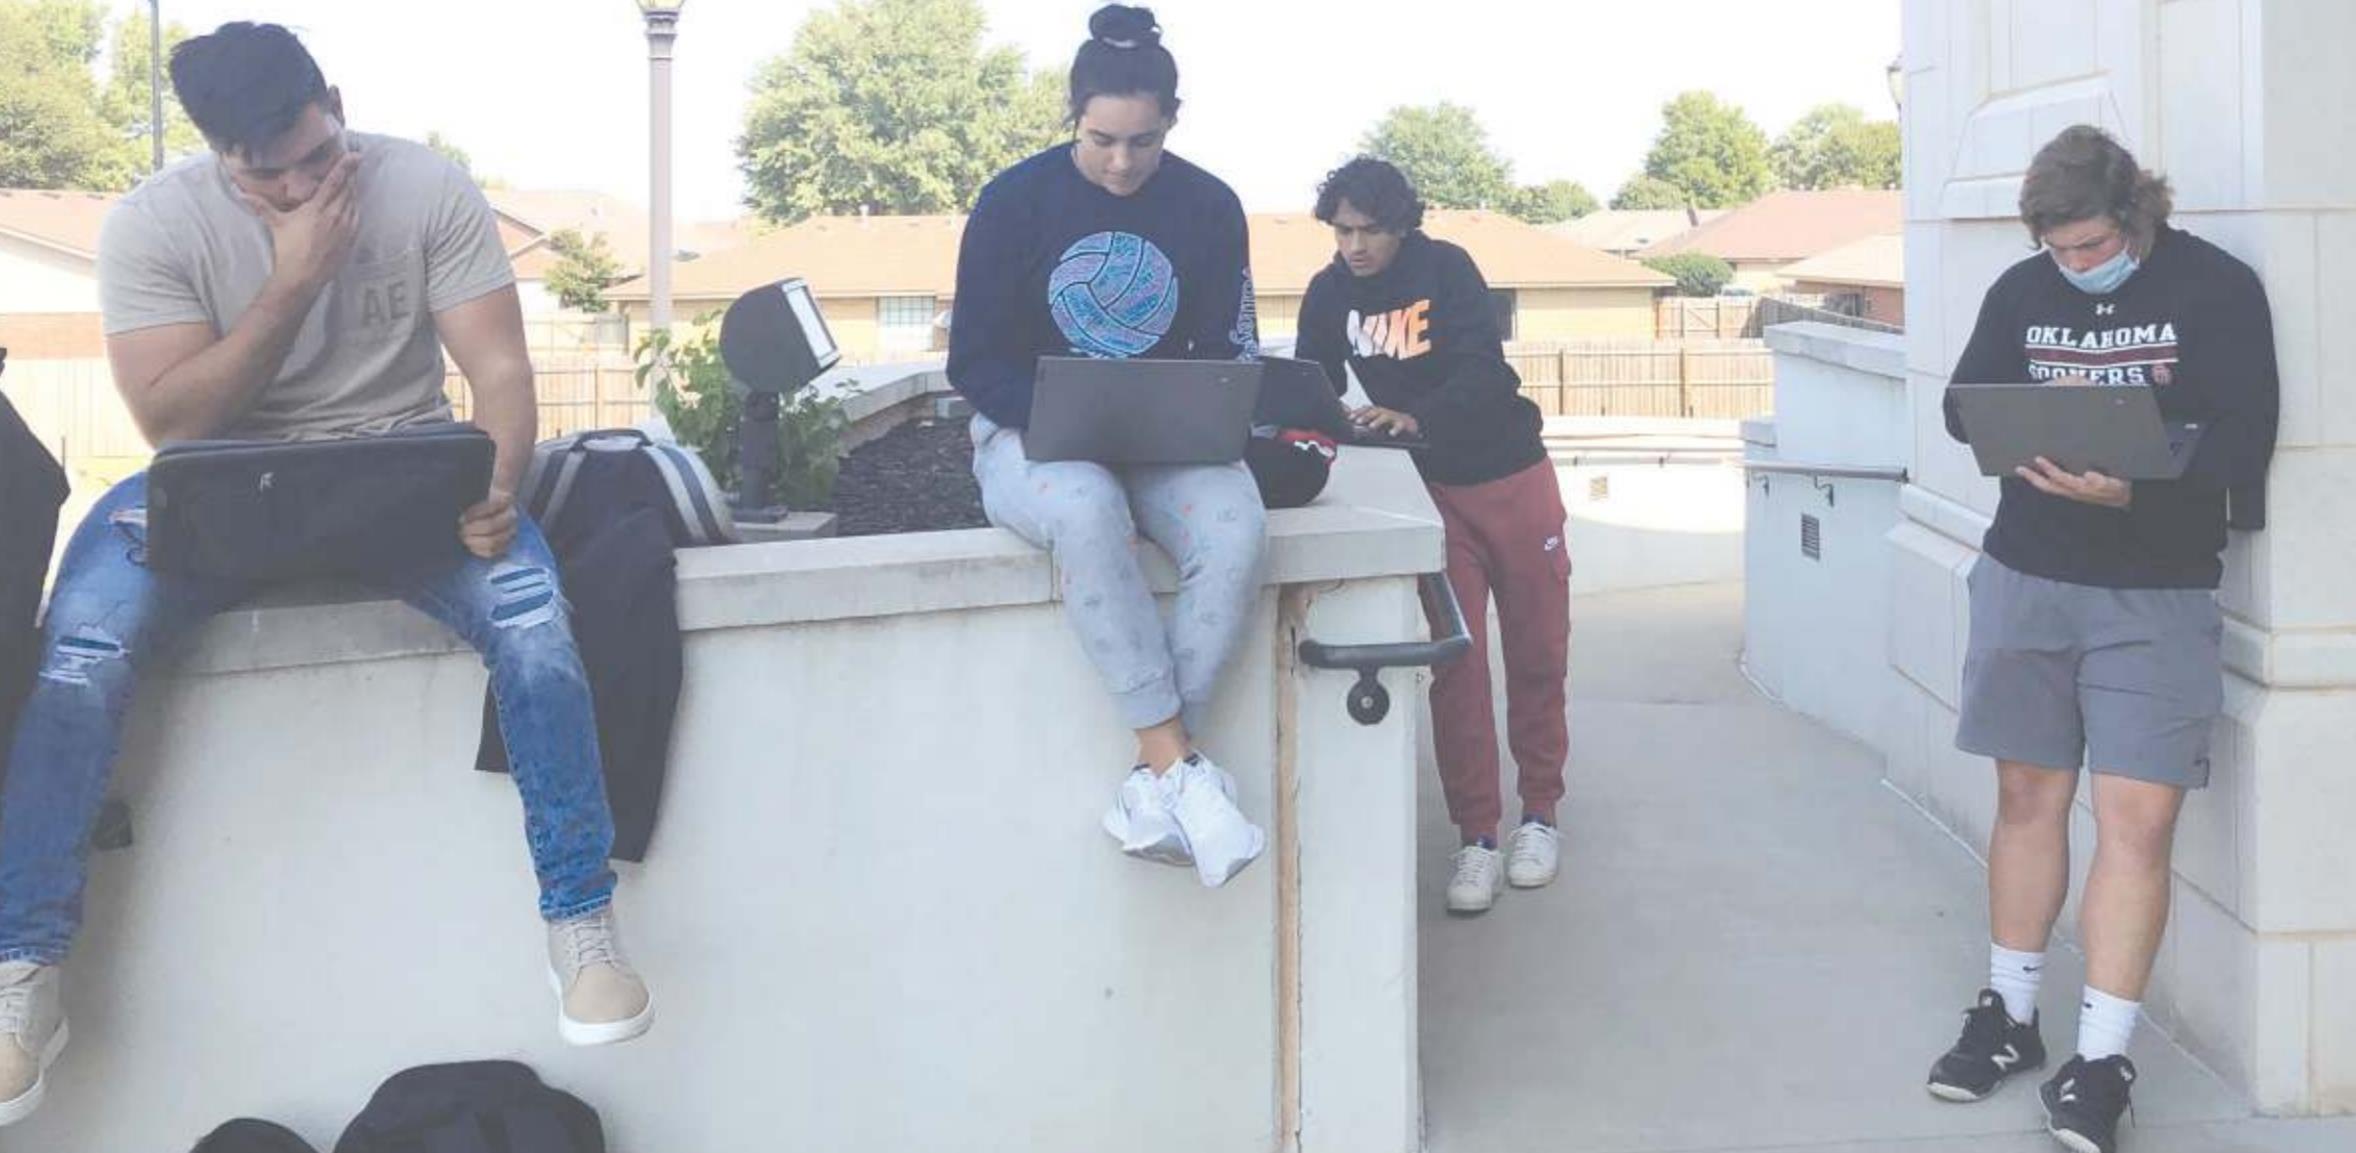 WHS Seniors have been diligently working on completing the FAFSA. The scheduled monthly career advisory time Wednesday was spent socially distancing outside using their new chrome books to complete the final steps on the FAFSA. Provided